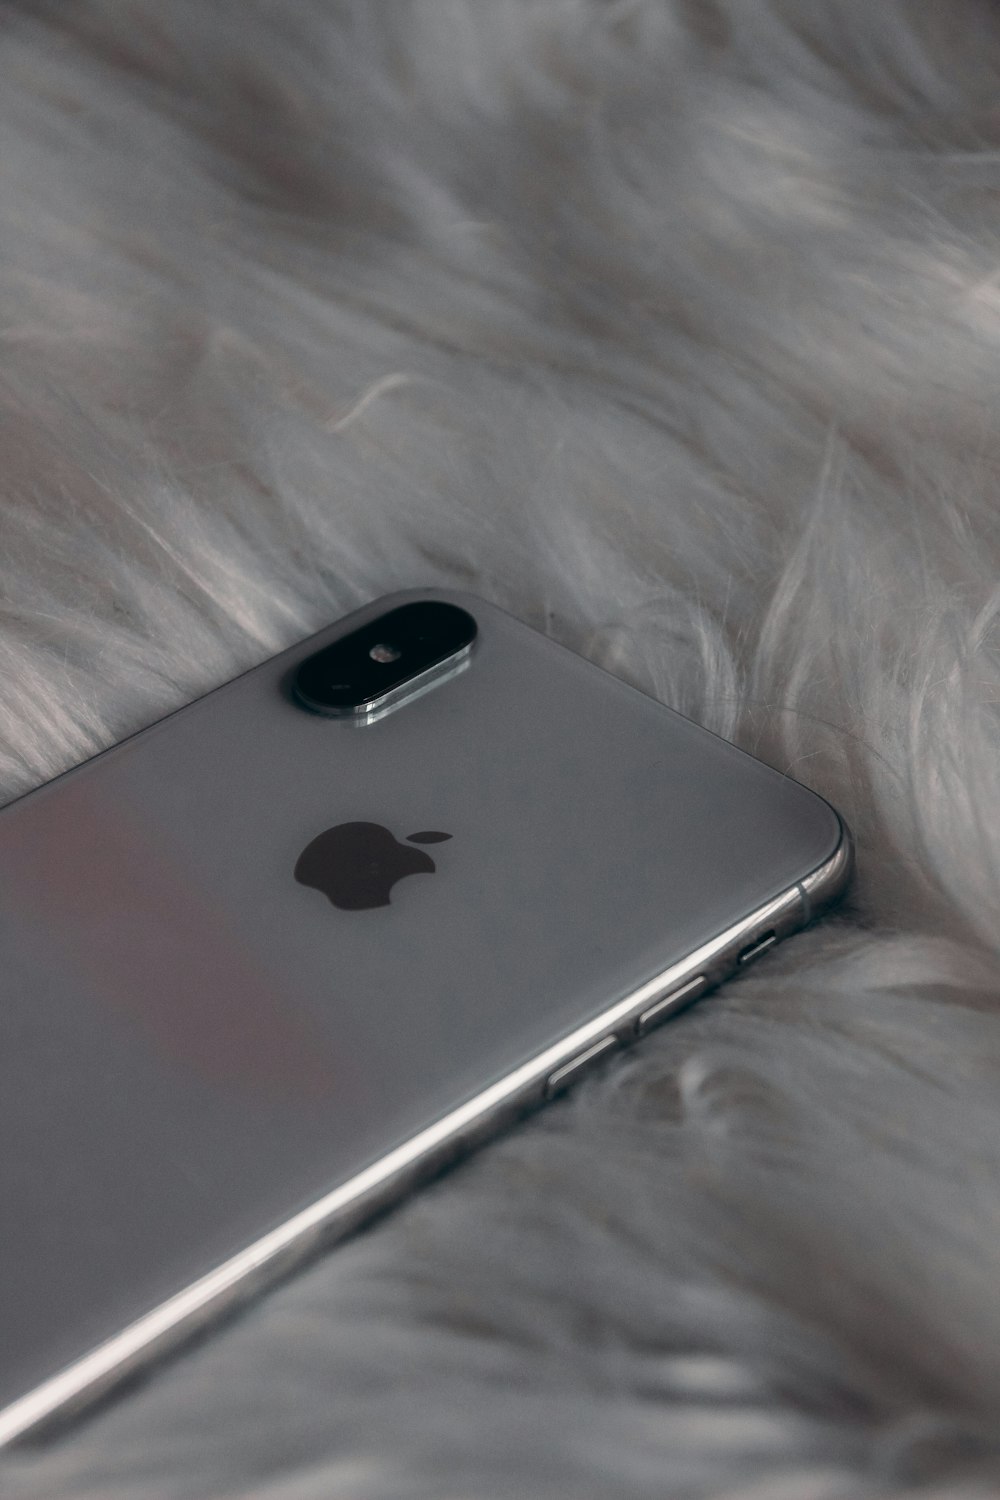 space gray iphone 6 on white textile